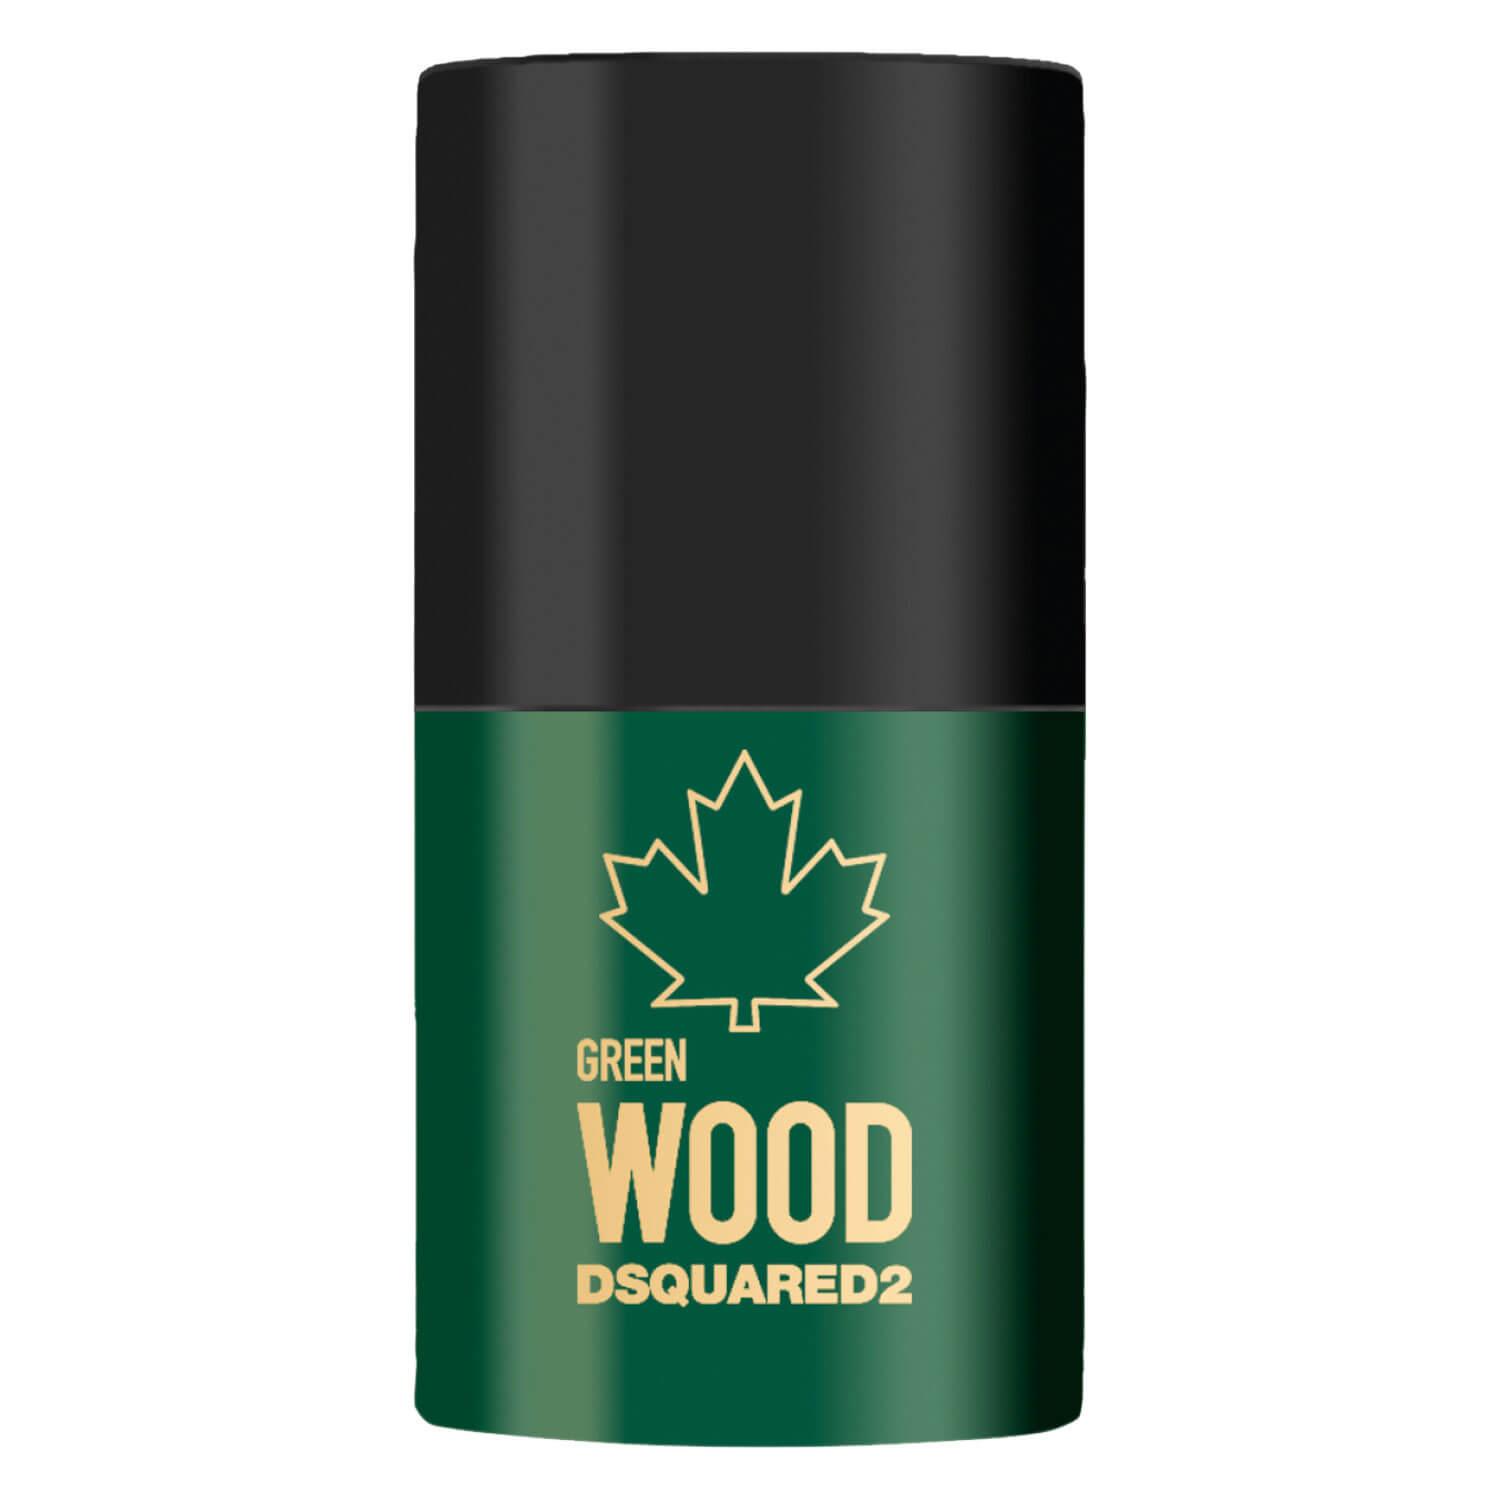 DSQUARED2 WOOD - Green Pour Homme Deodorant Stick